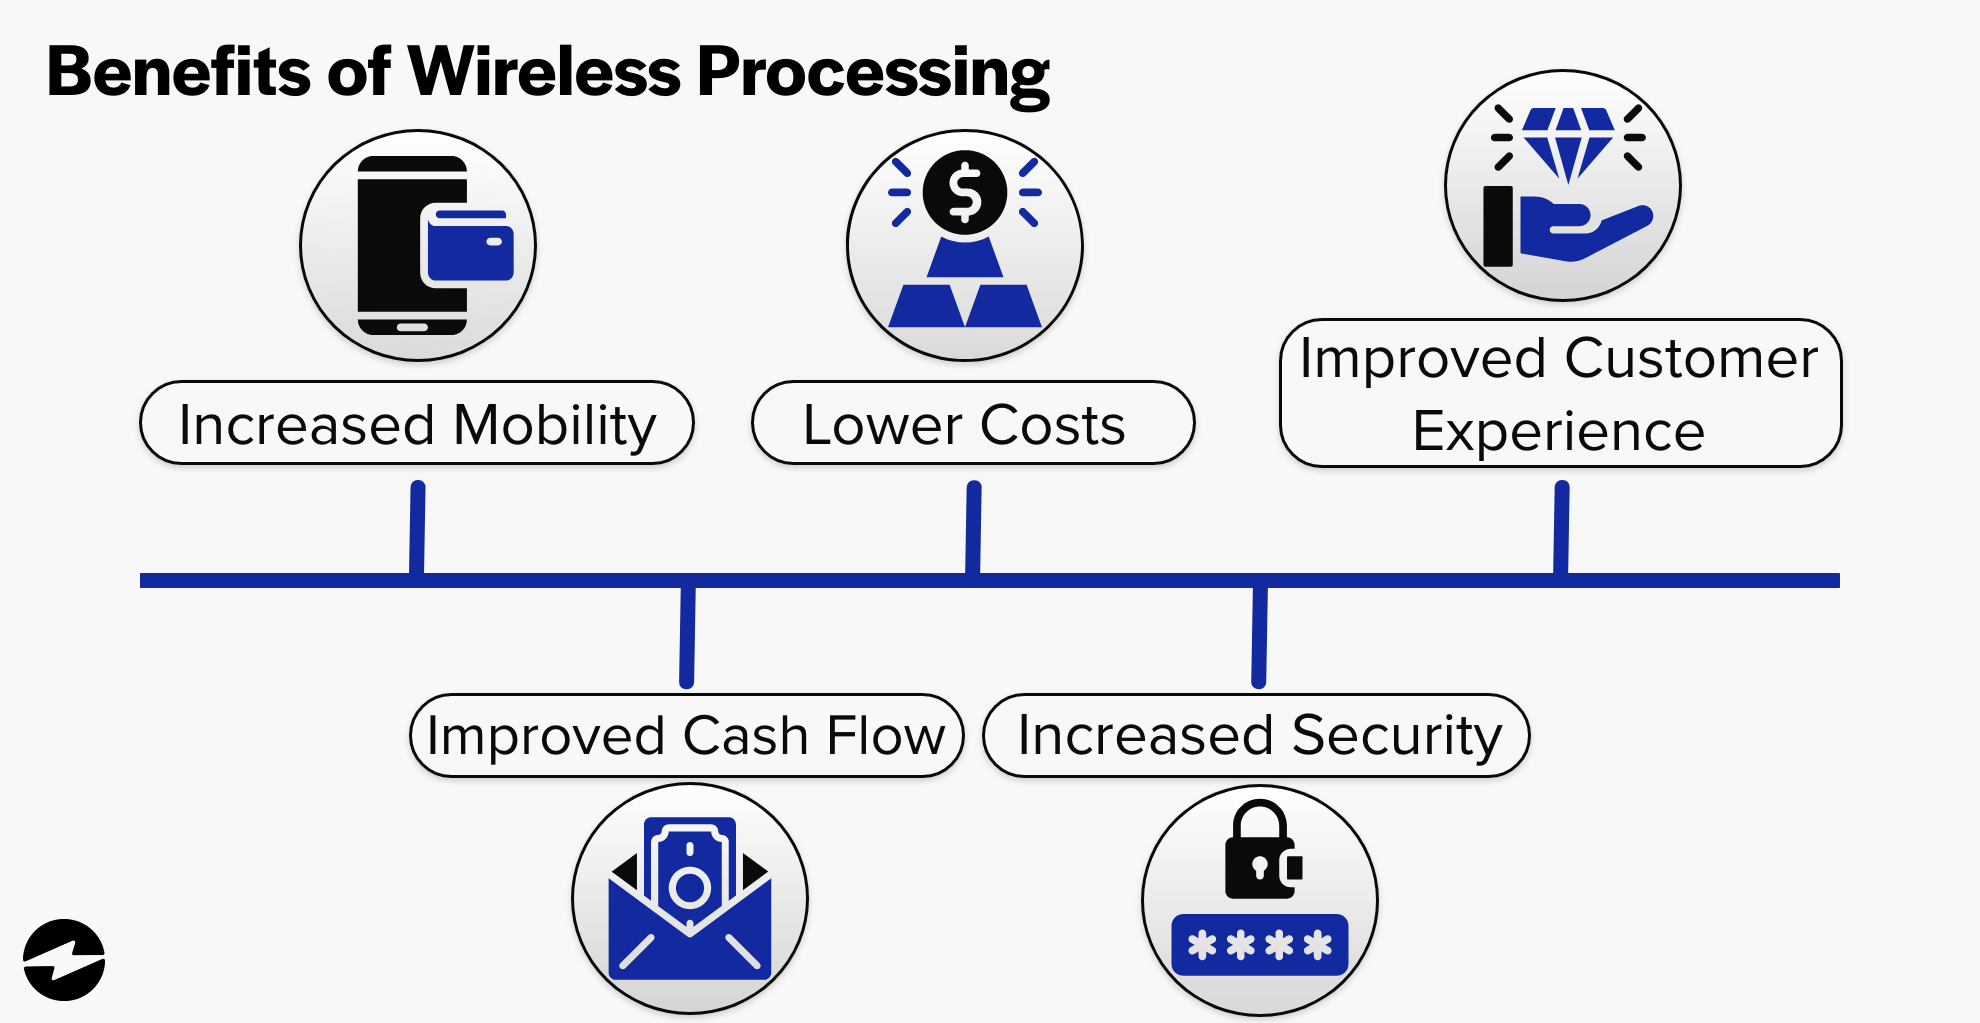 Benefits of Wireless Processing